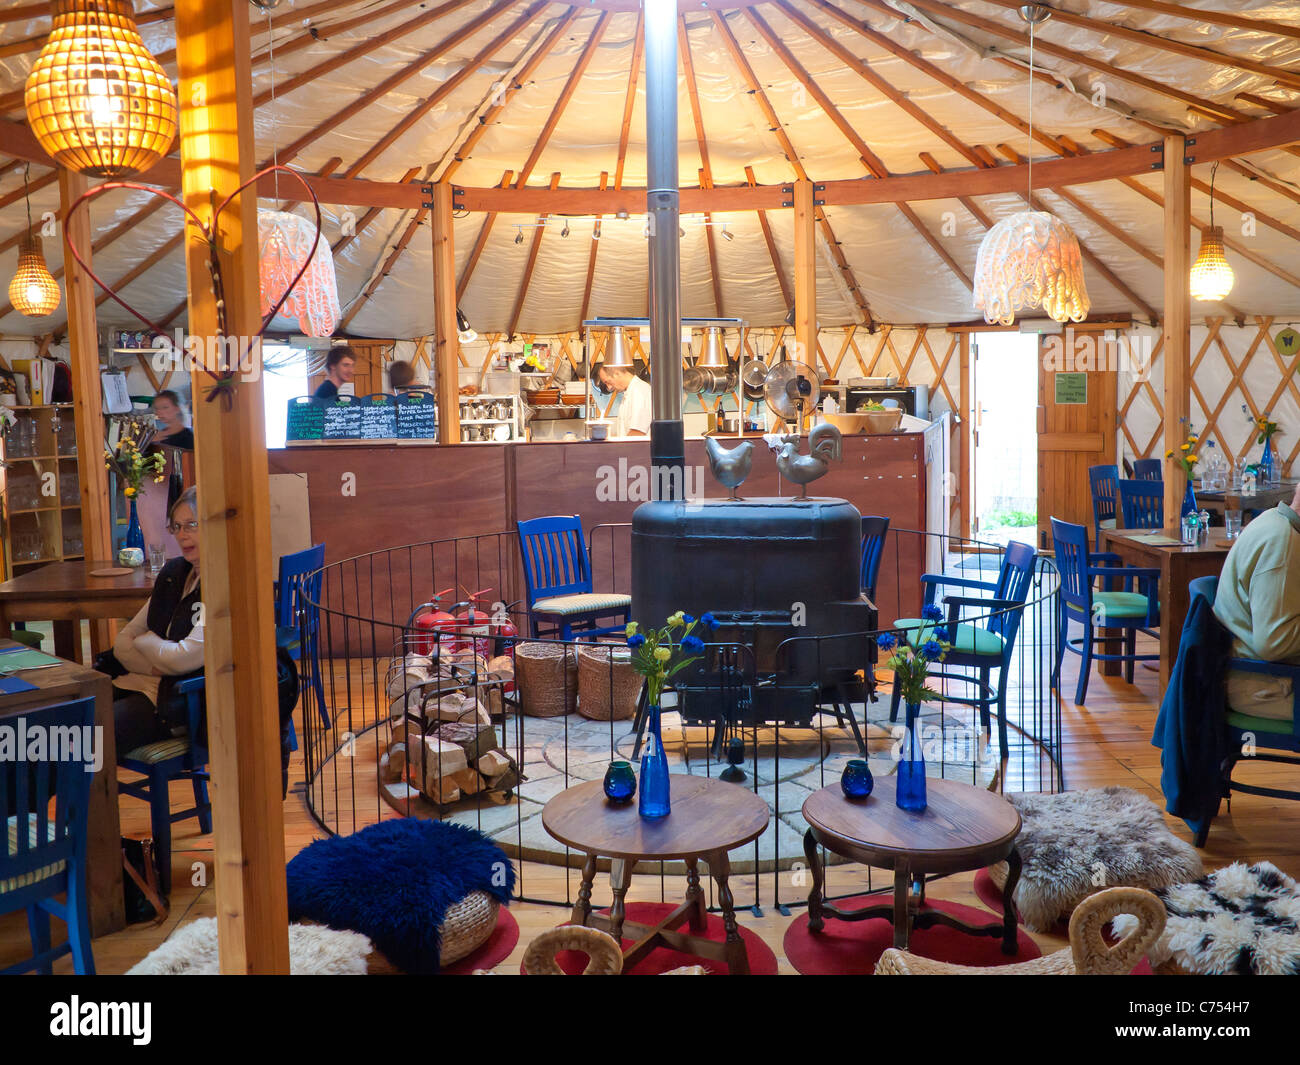 Interior of a restaurant in a traditional Mongolian Yurt At Thornham Norfolk UK Stock Photo